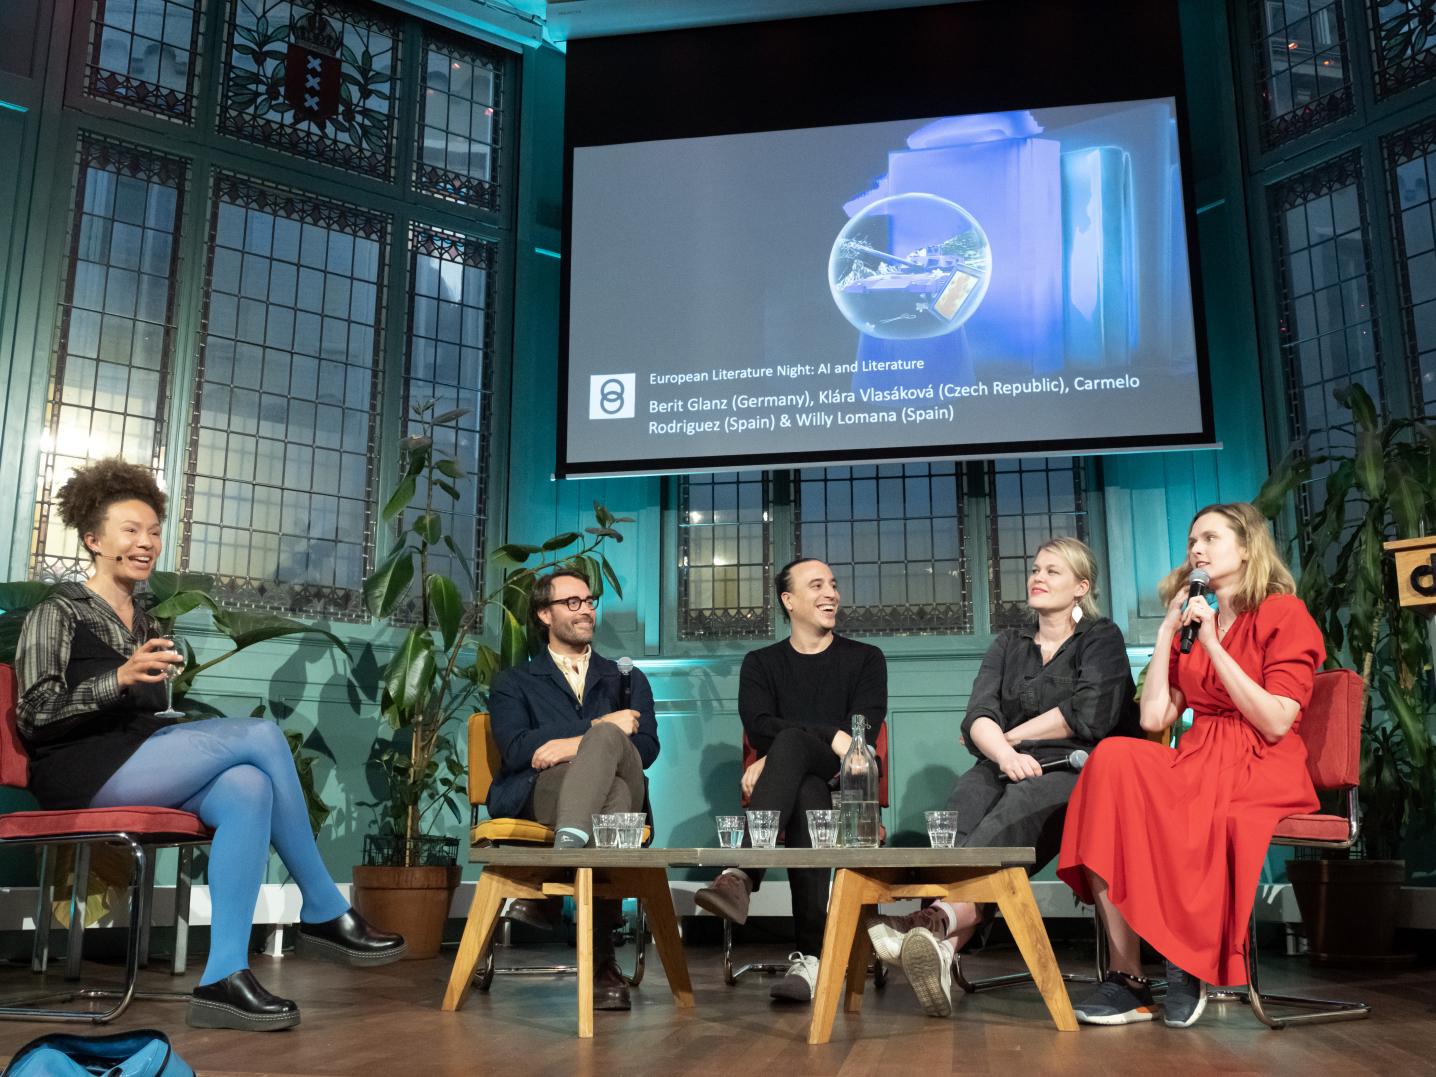 During the sold-out European Literature Night of 2023, no less than 10 European writers explored utopian and dystopian mirrors for present-day society through their work.